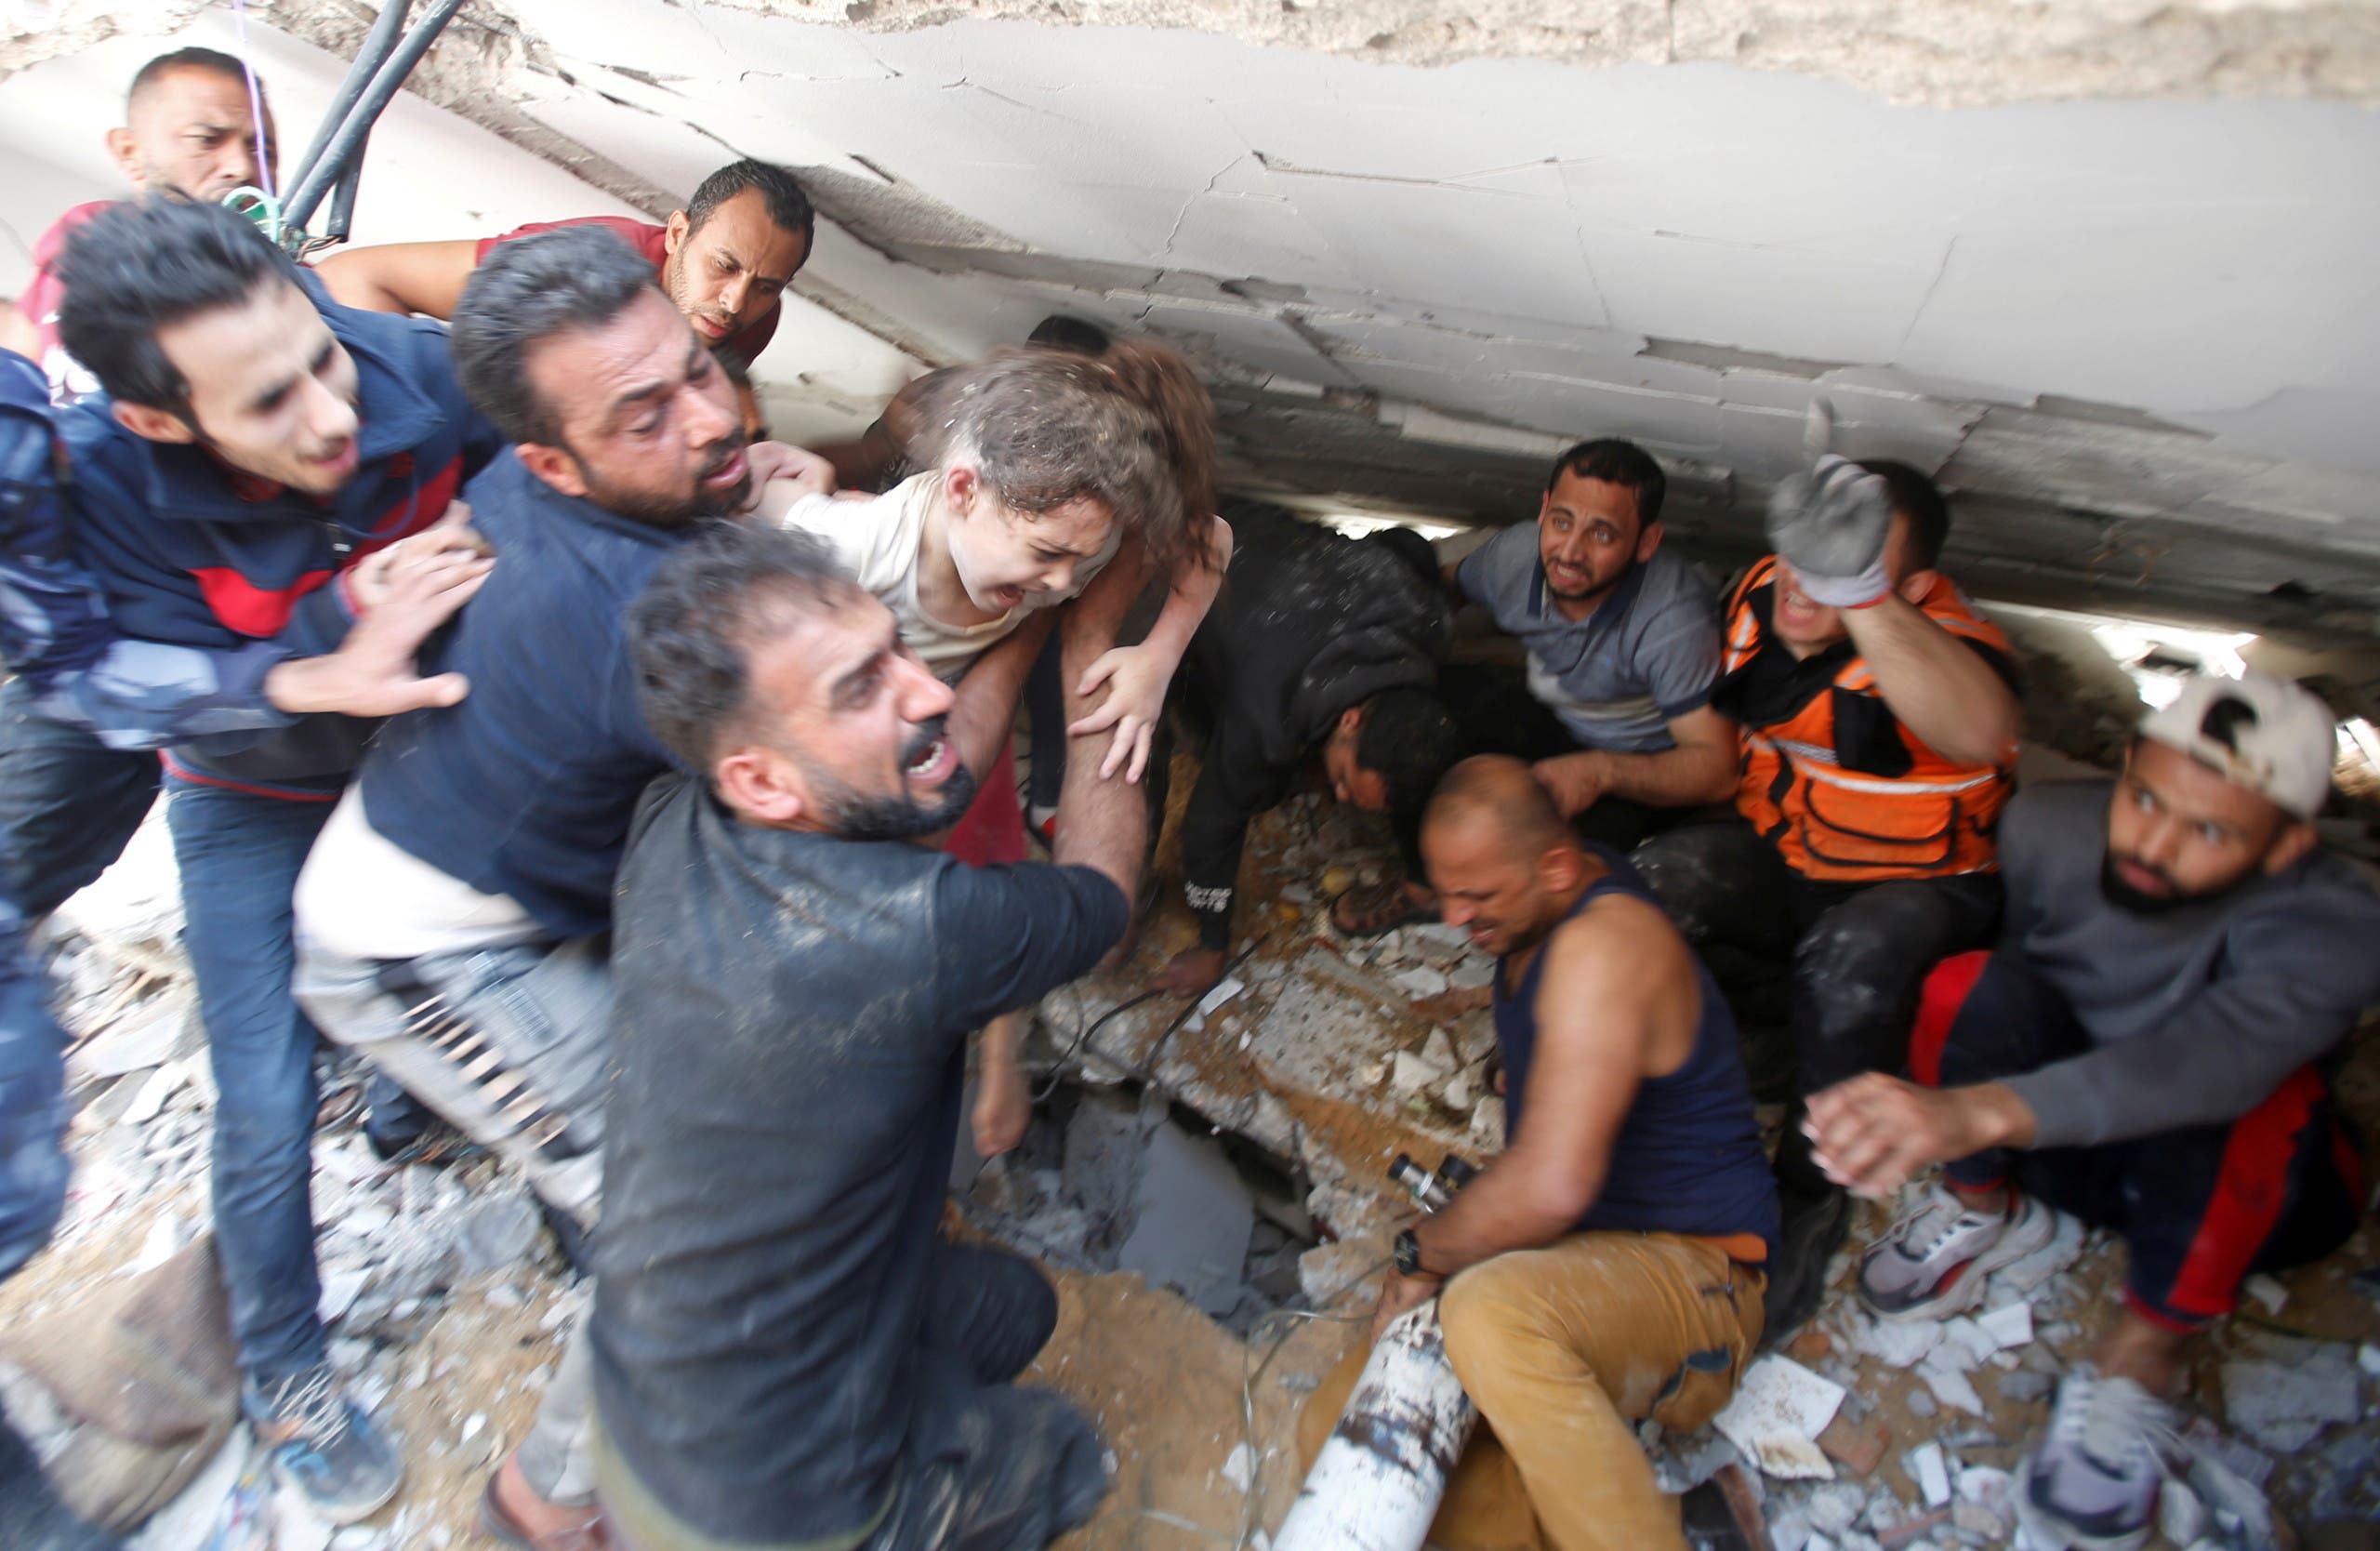 Rescuers carry a girl as they search for victims amid rubble at the site of Israeli air strikes, in Gaza City. (Reuters)